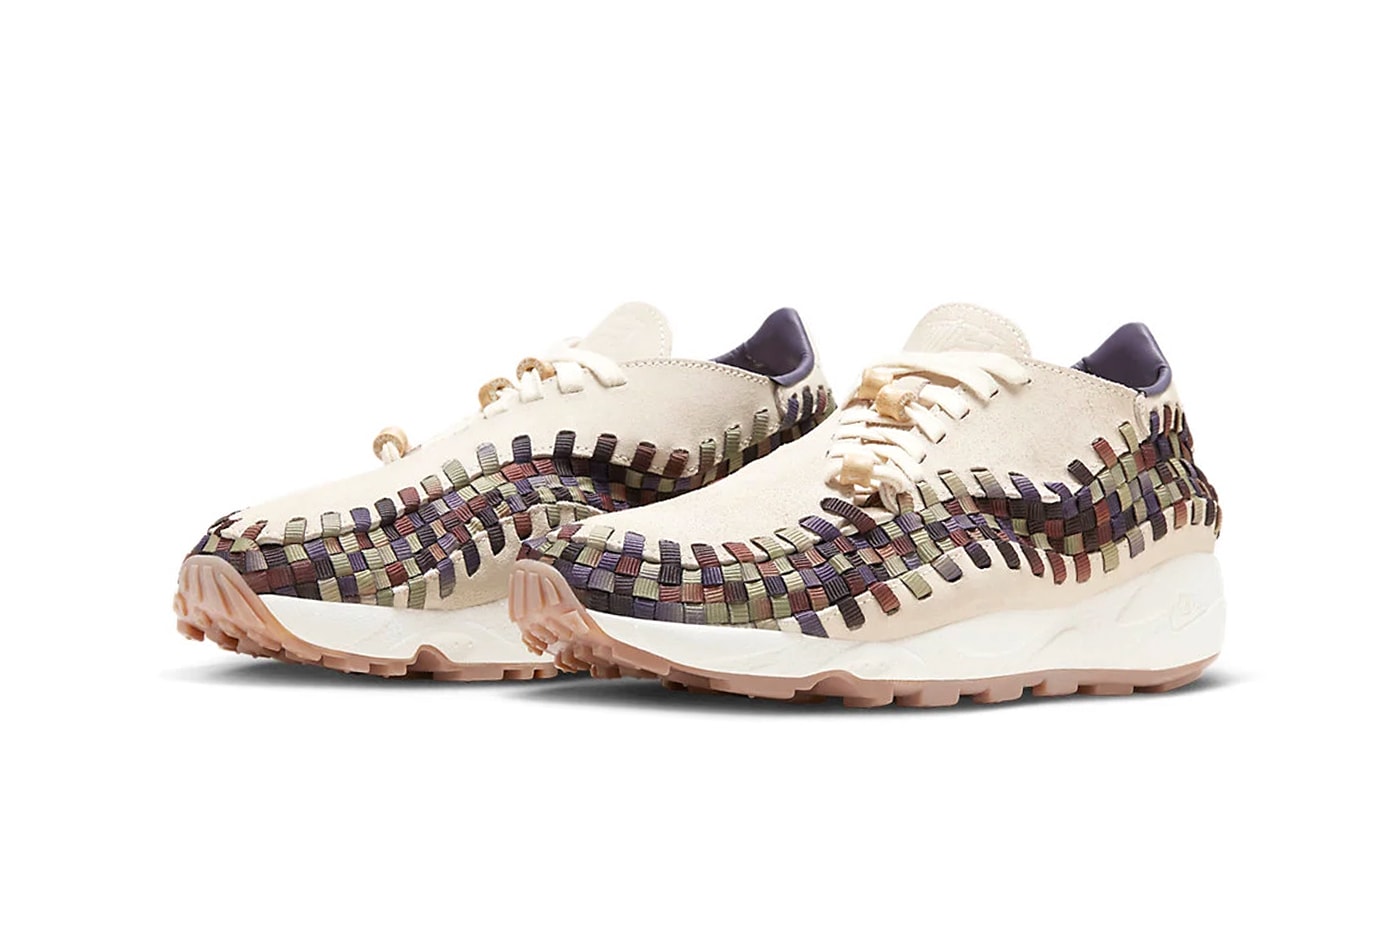 Official Look at the Nike Air Footscape Woven "Nai-ke" FV3615-191 release info sail multi color 90s silhouette sneakers shoes